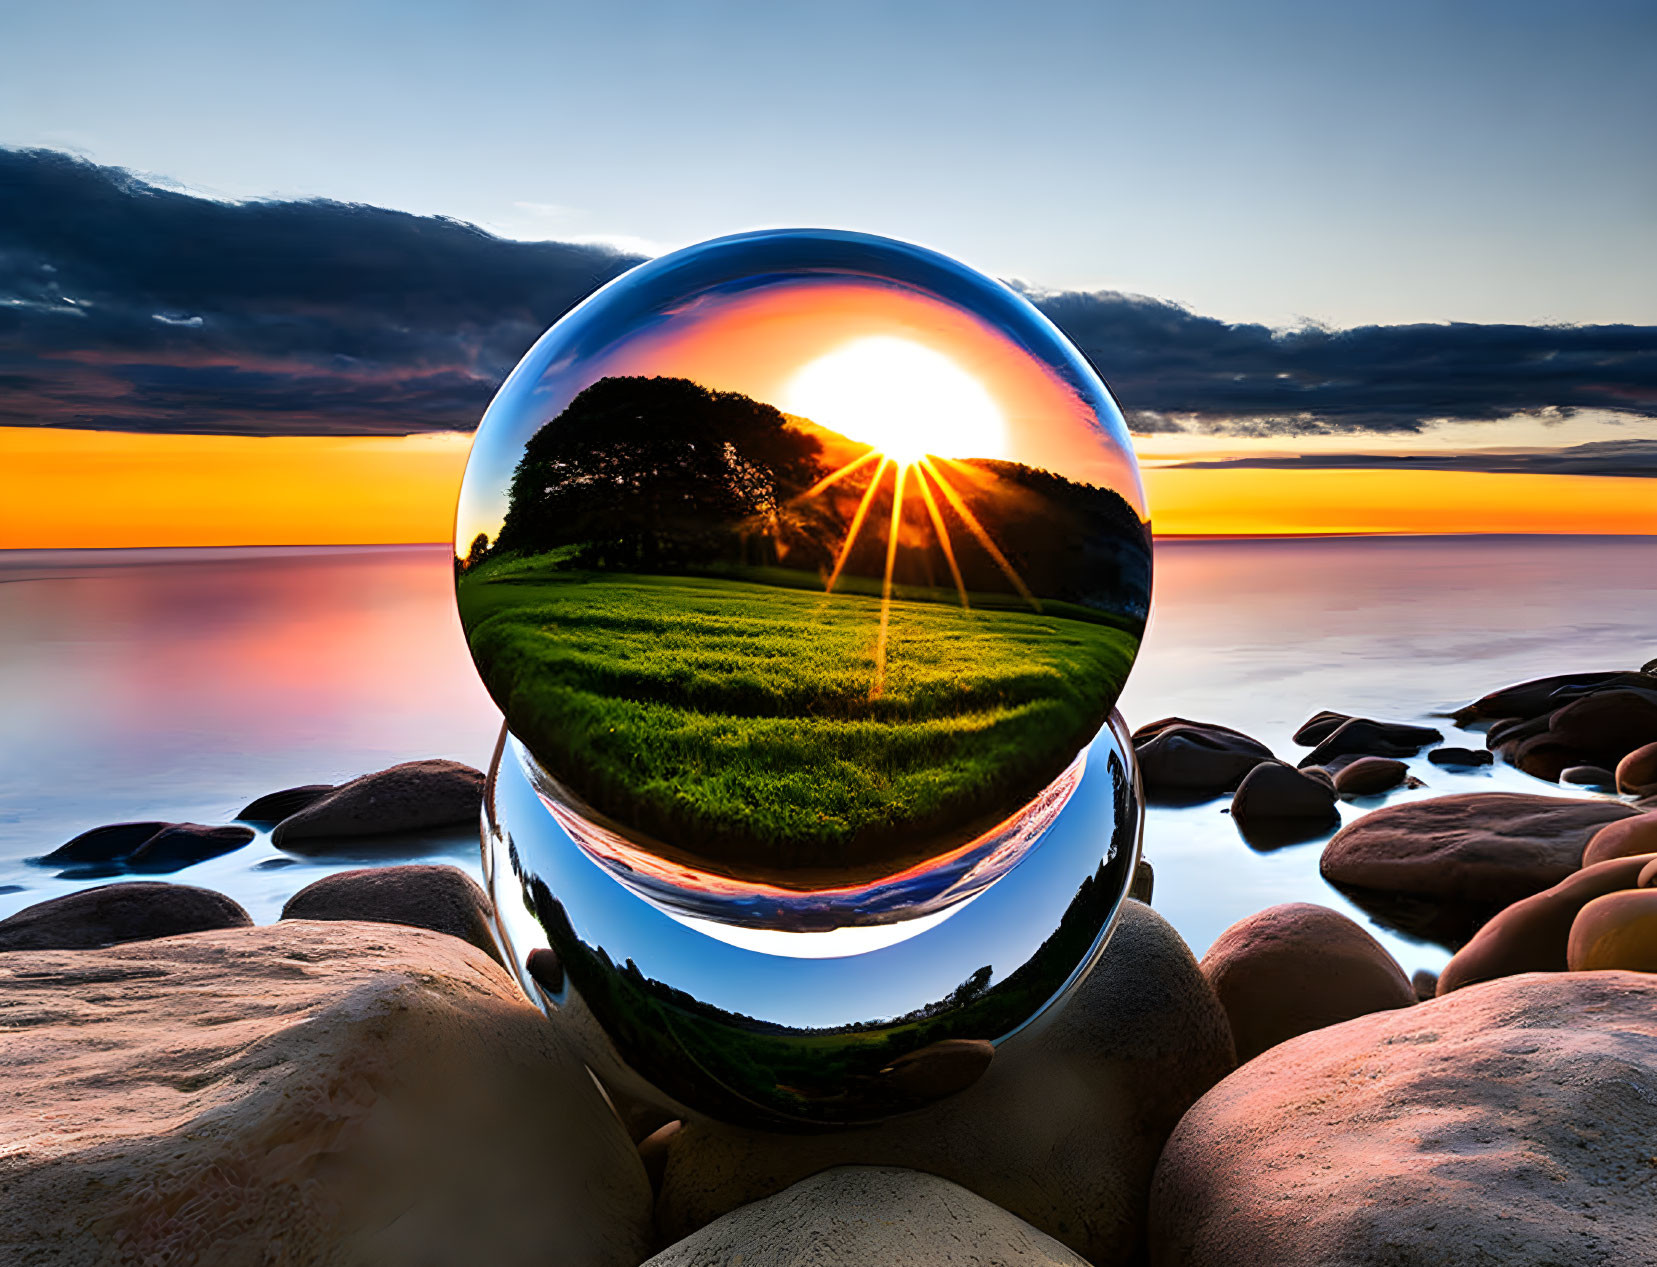 Crystal ball reflects sunset over green field and trees on rocky shore